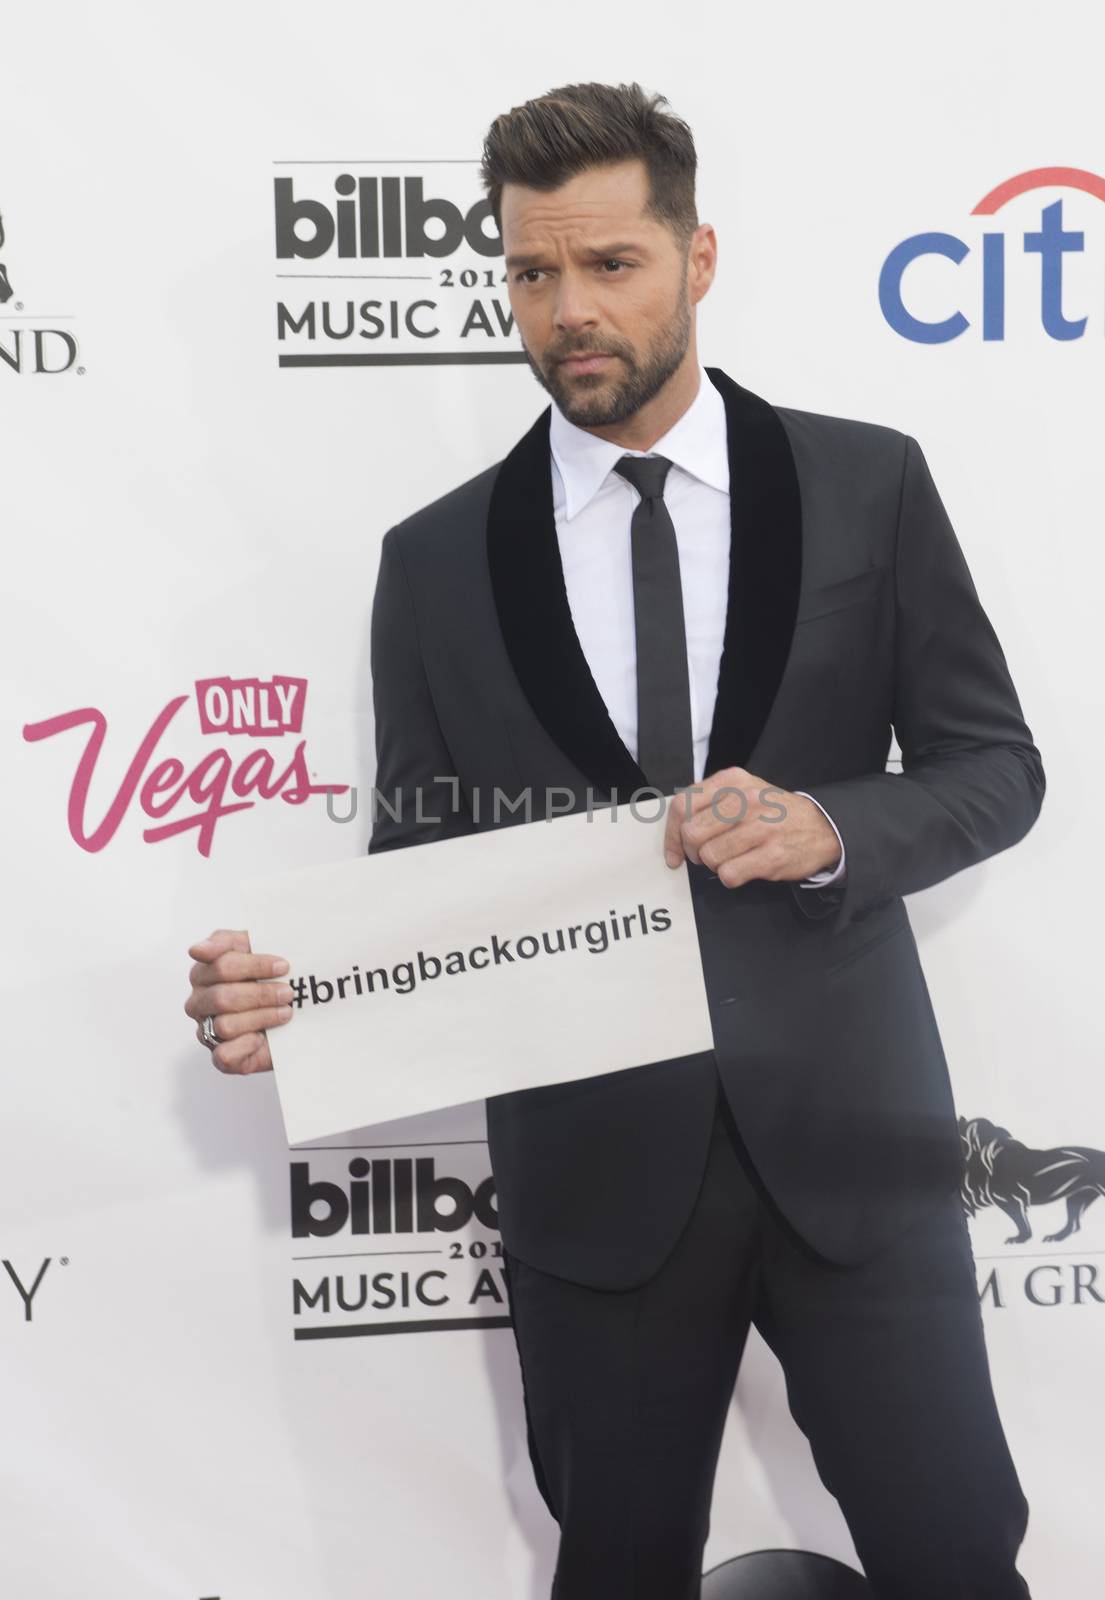 LAS VEGAS - MAY 18 : Musician Ricky Martin attend the 2014 Billboard Music Awards at the MGM Grand Garden Arena on May 18 , 2014 in Las Vegas.